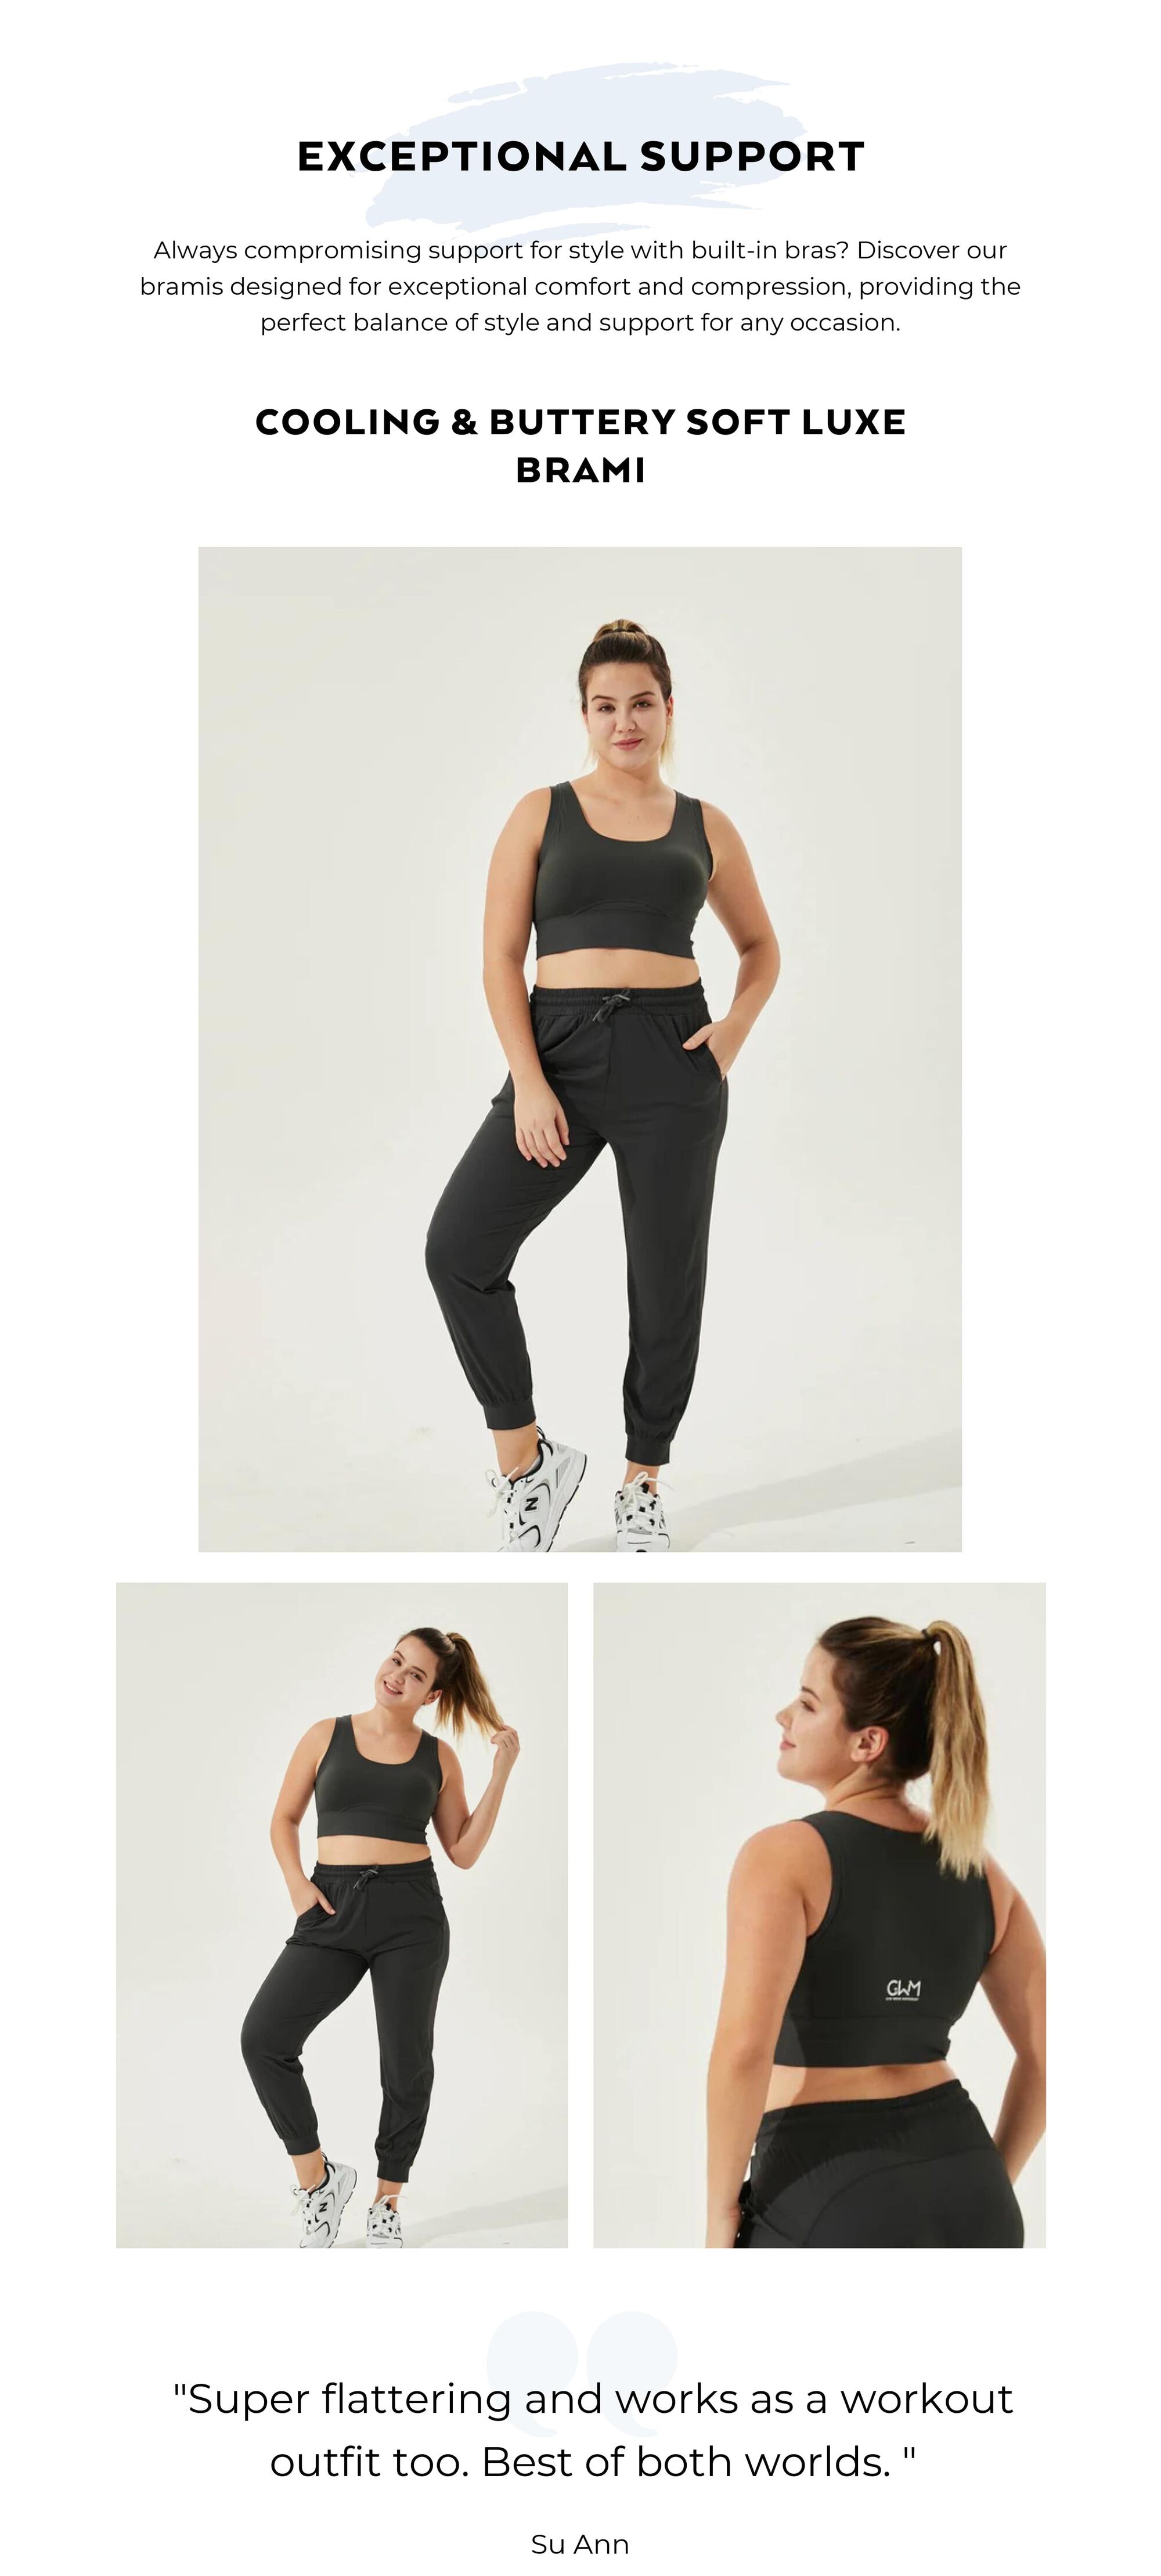 Unlock Your Slimmer Belly Dreams: Introducing Our Ultimate Tummy Tucker  Leggings - Gym Wear Movement